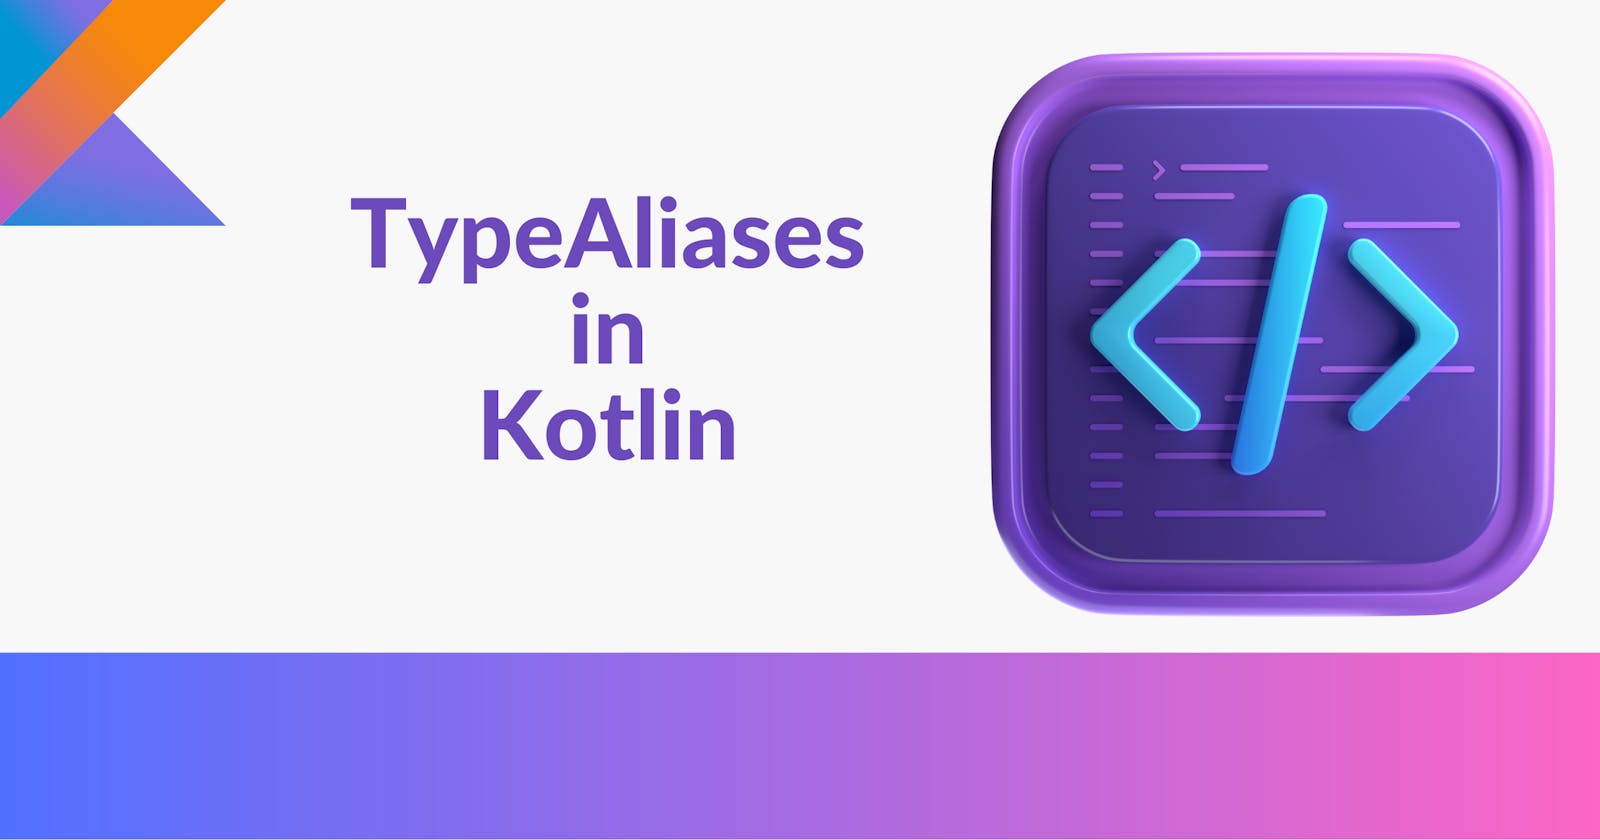 What are Type aliases in Kotlin?